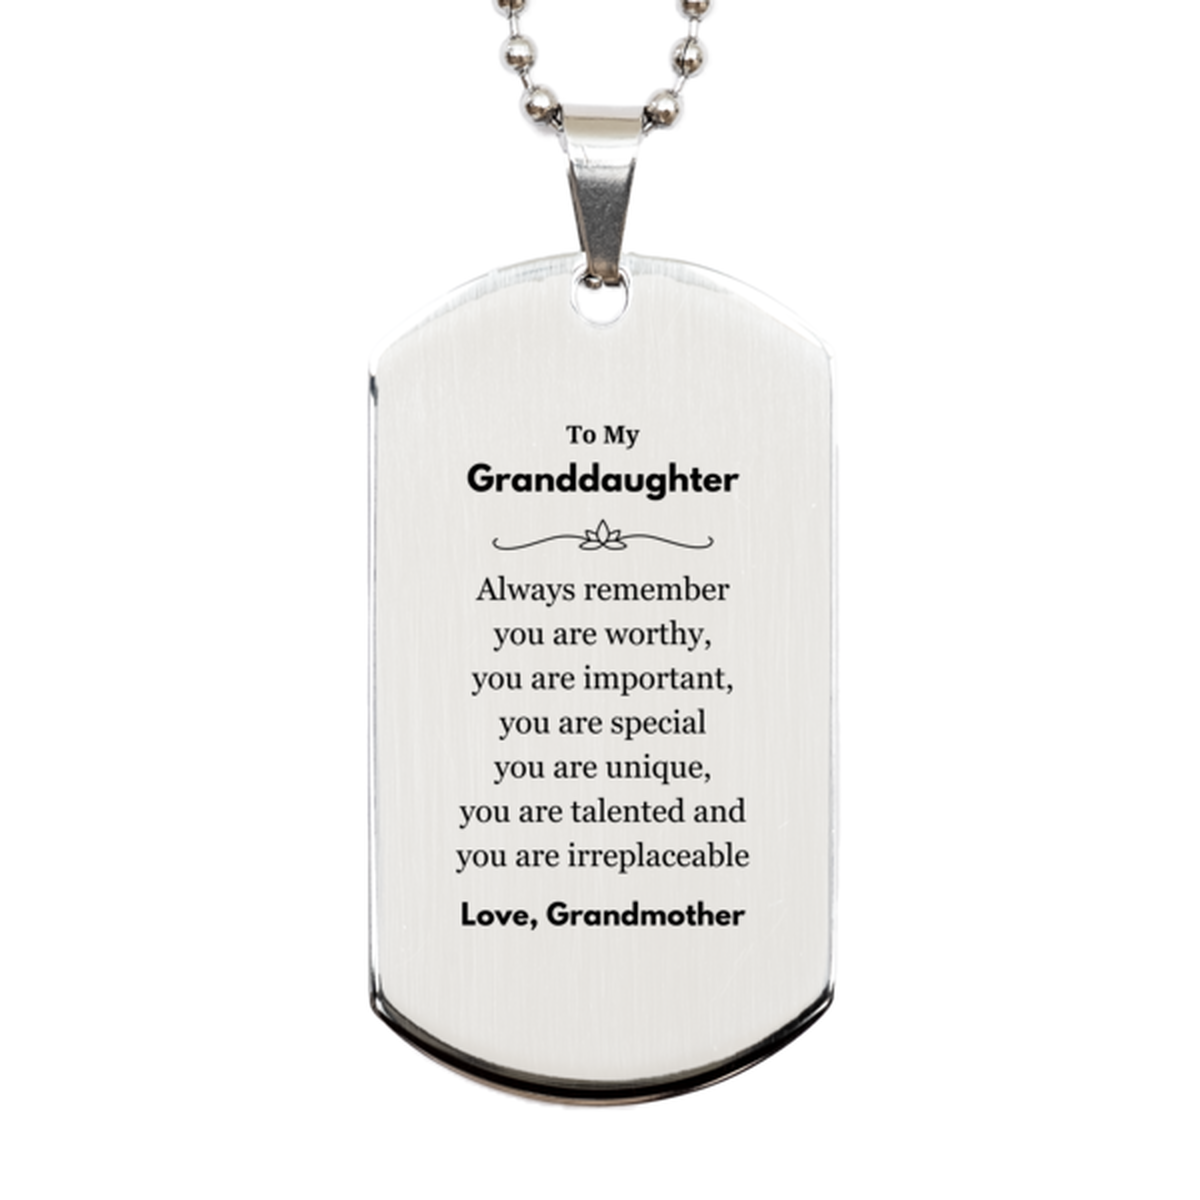 Granddaughter Birthday Gifts from Grandmother, Inspirational Silver Dog Tag for Granddaughter Christmas Graduation Gifts for Granddaughter Always remember you are worthy, you are important. Love, Grandmother